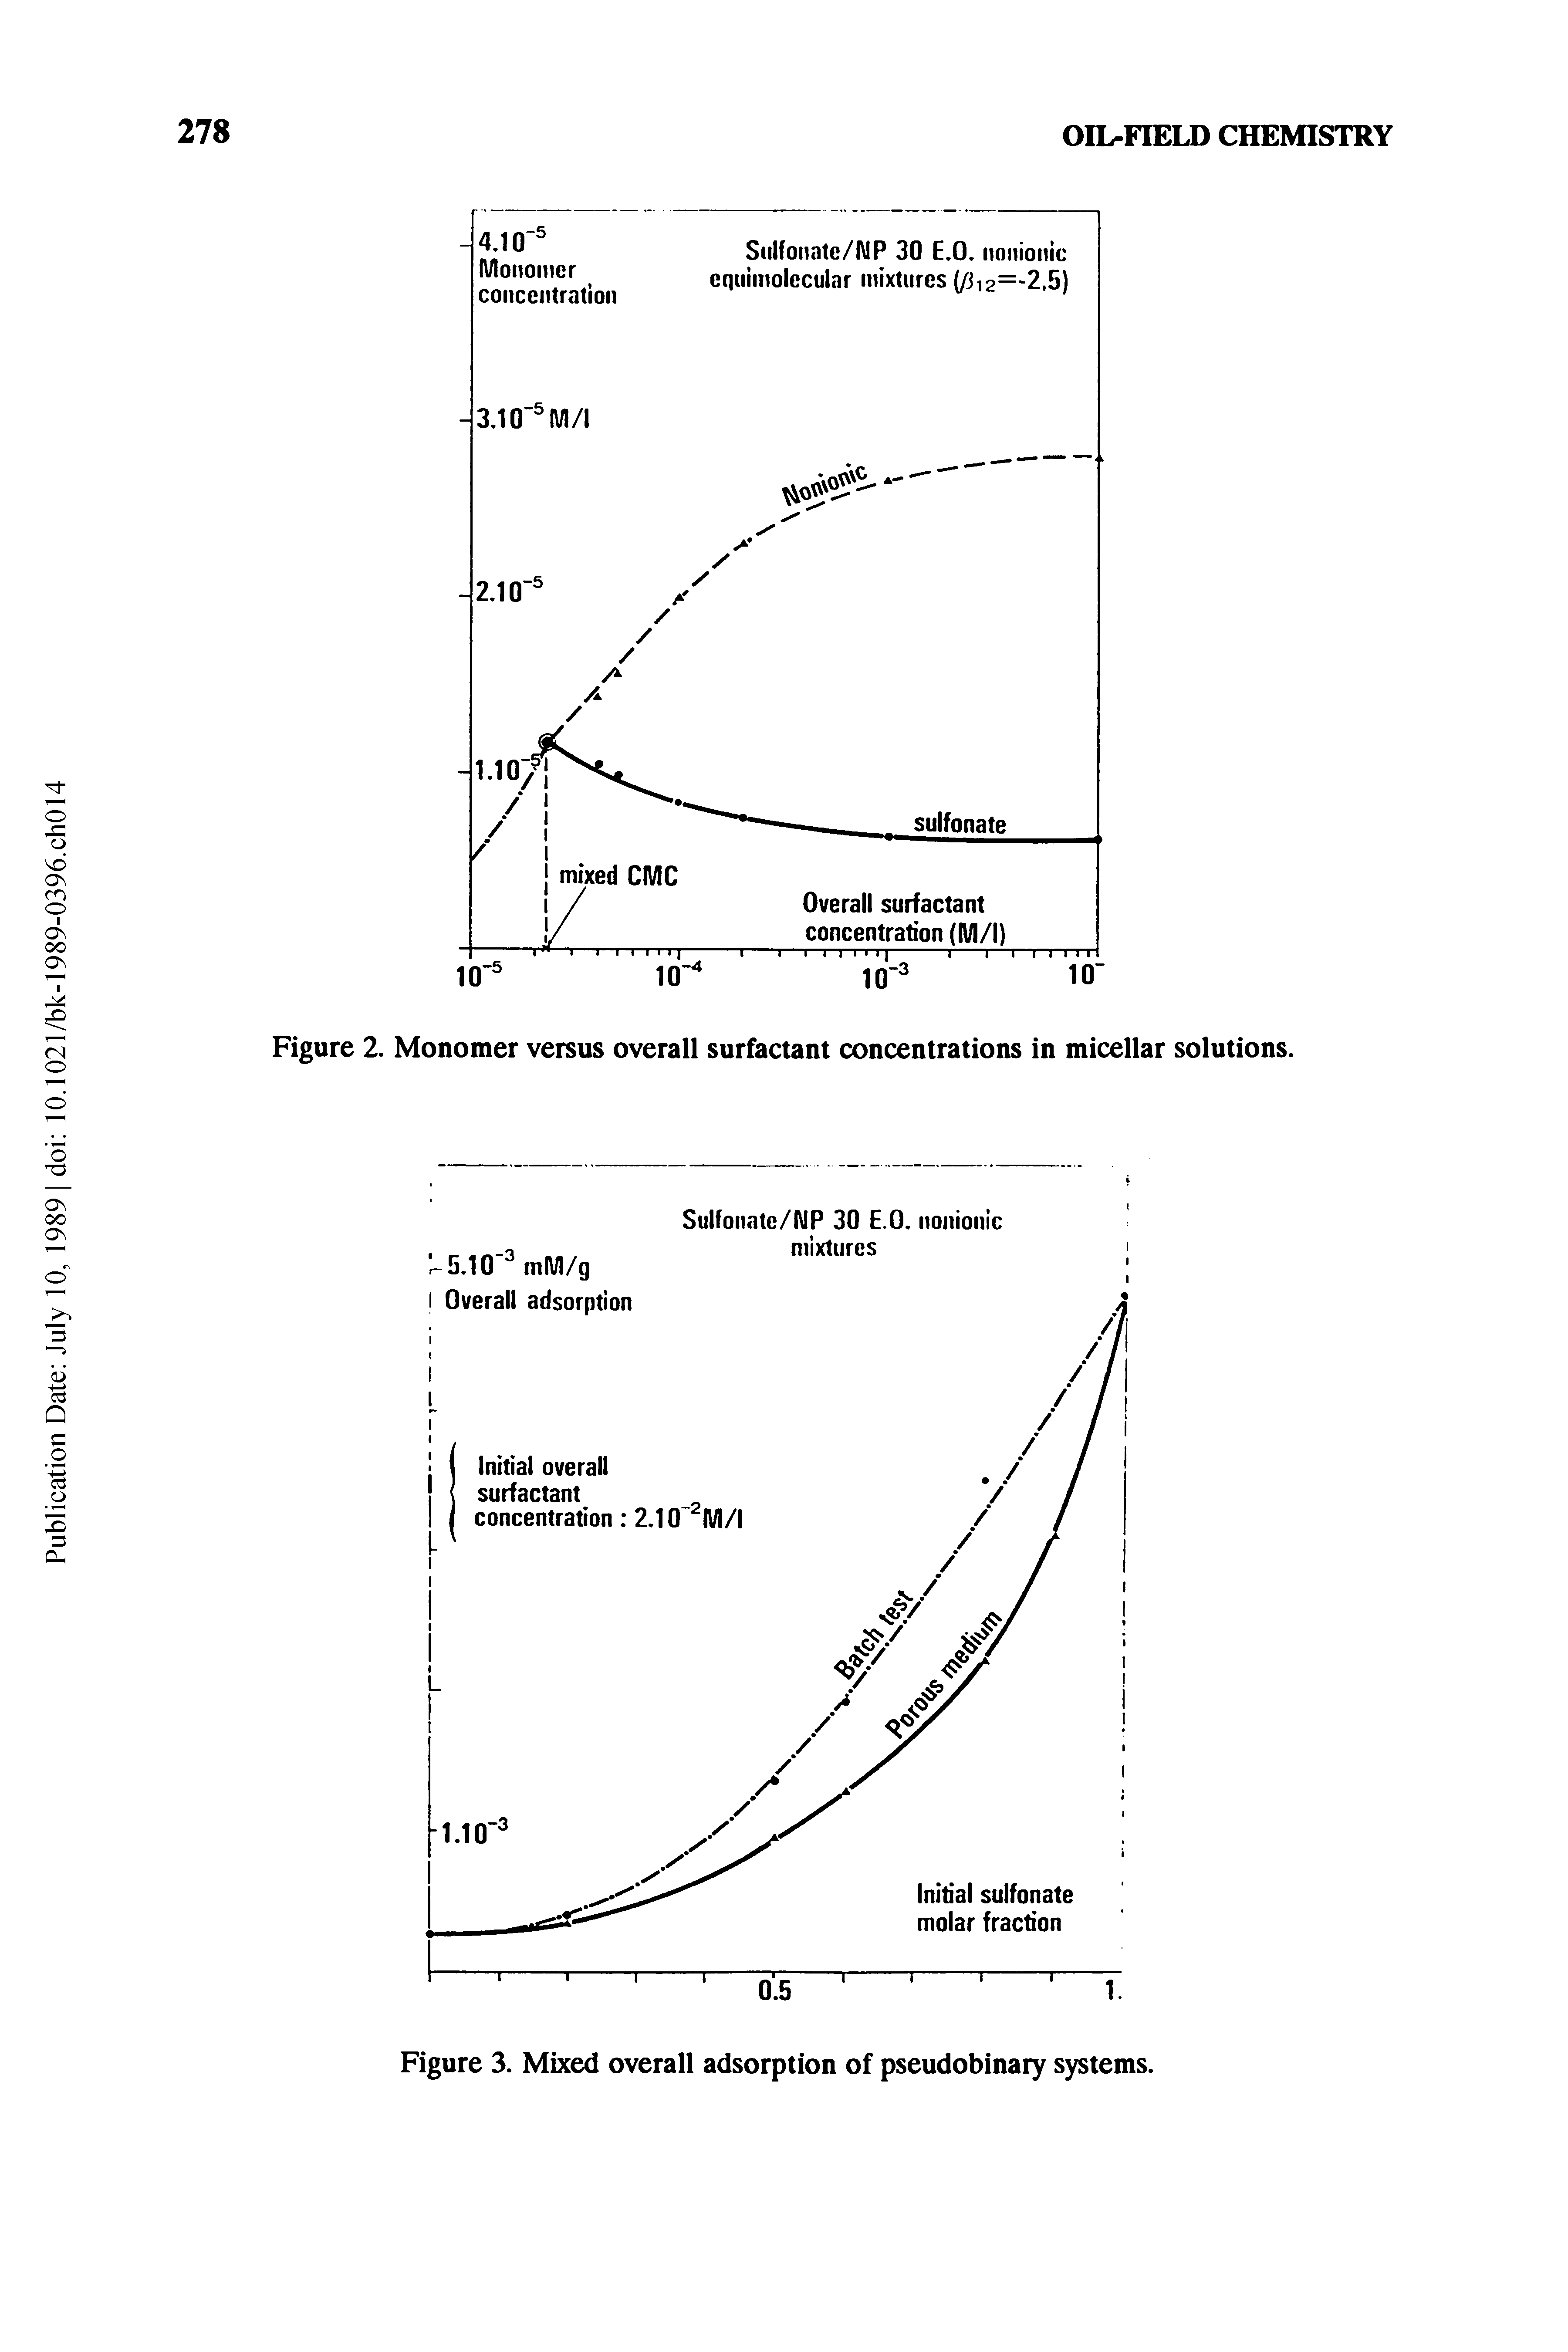 Figure 2. Monomer versus overall surfactant concentrations in micellar solutions.